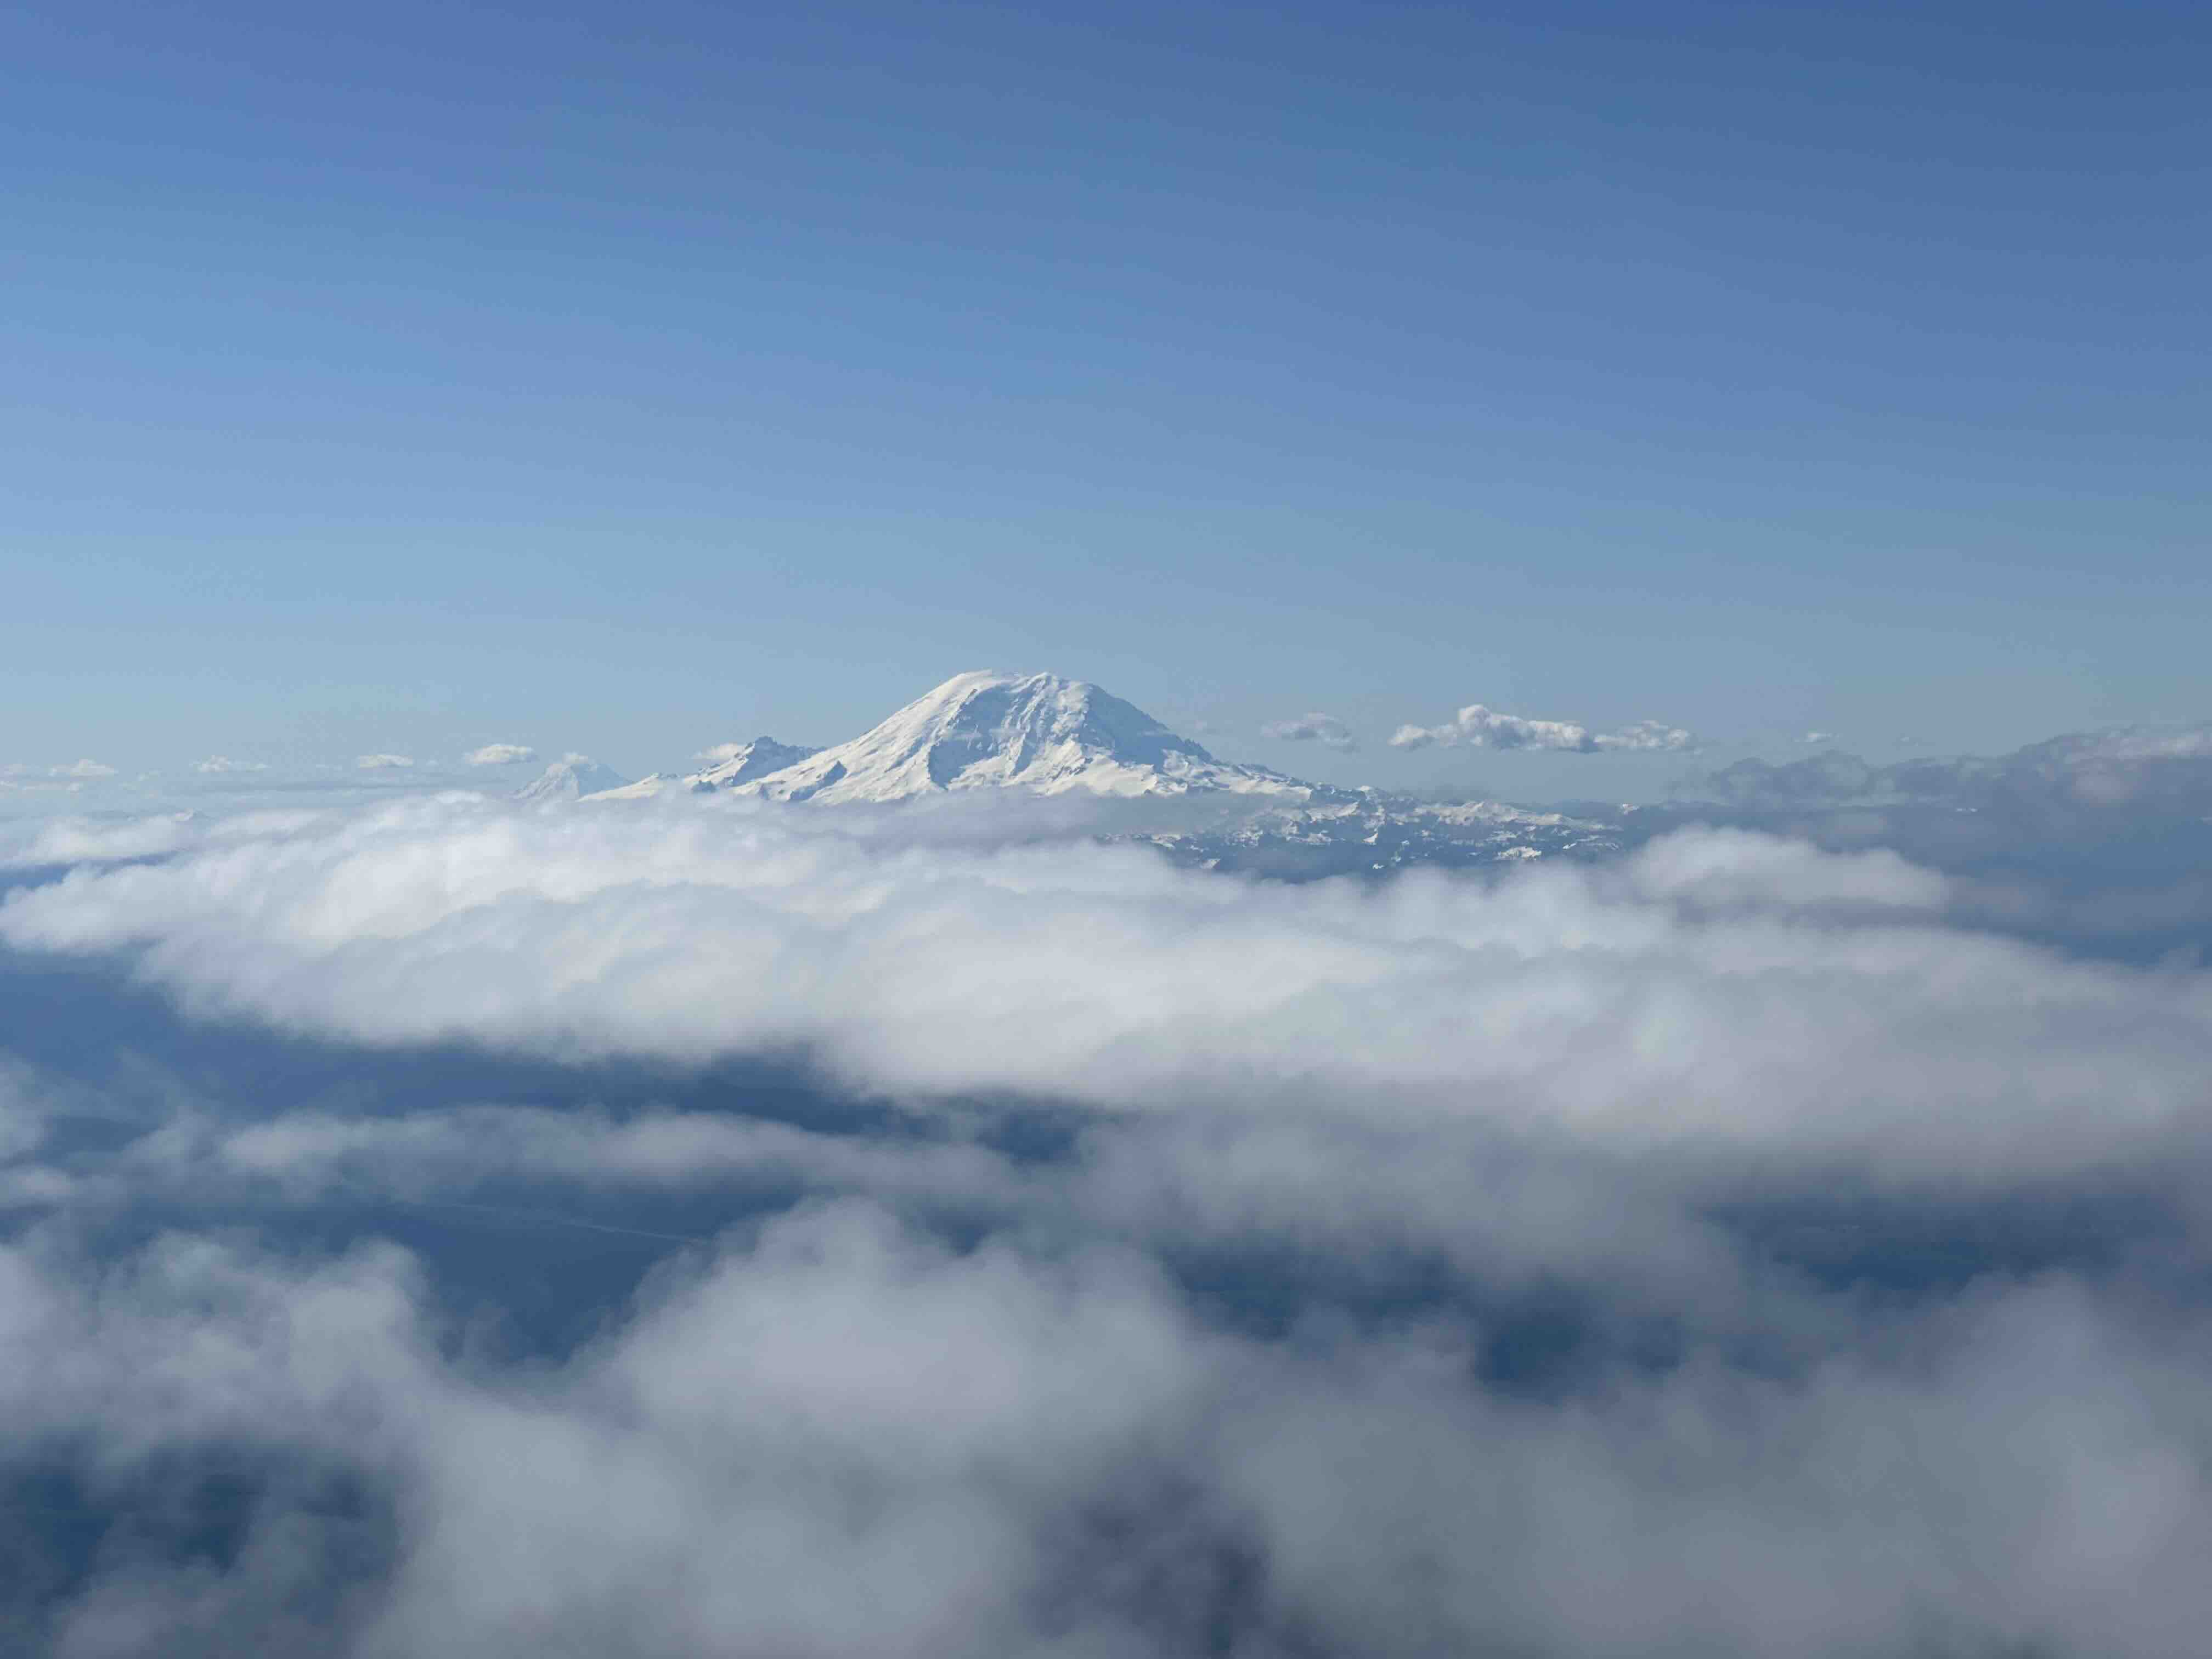 Seattle’s Mount Rainier rising about the clouds, as seen from an airplane. Photo by Adriana Villela